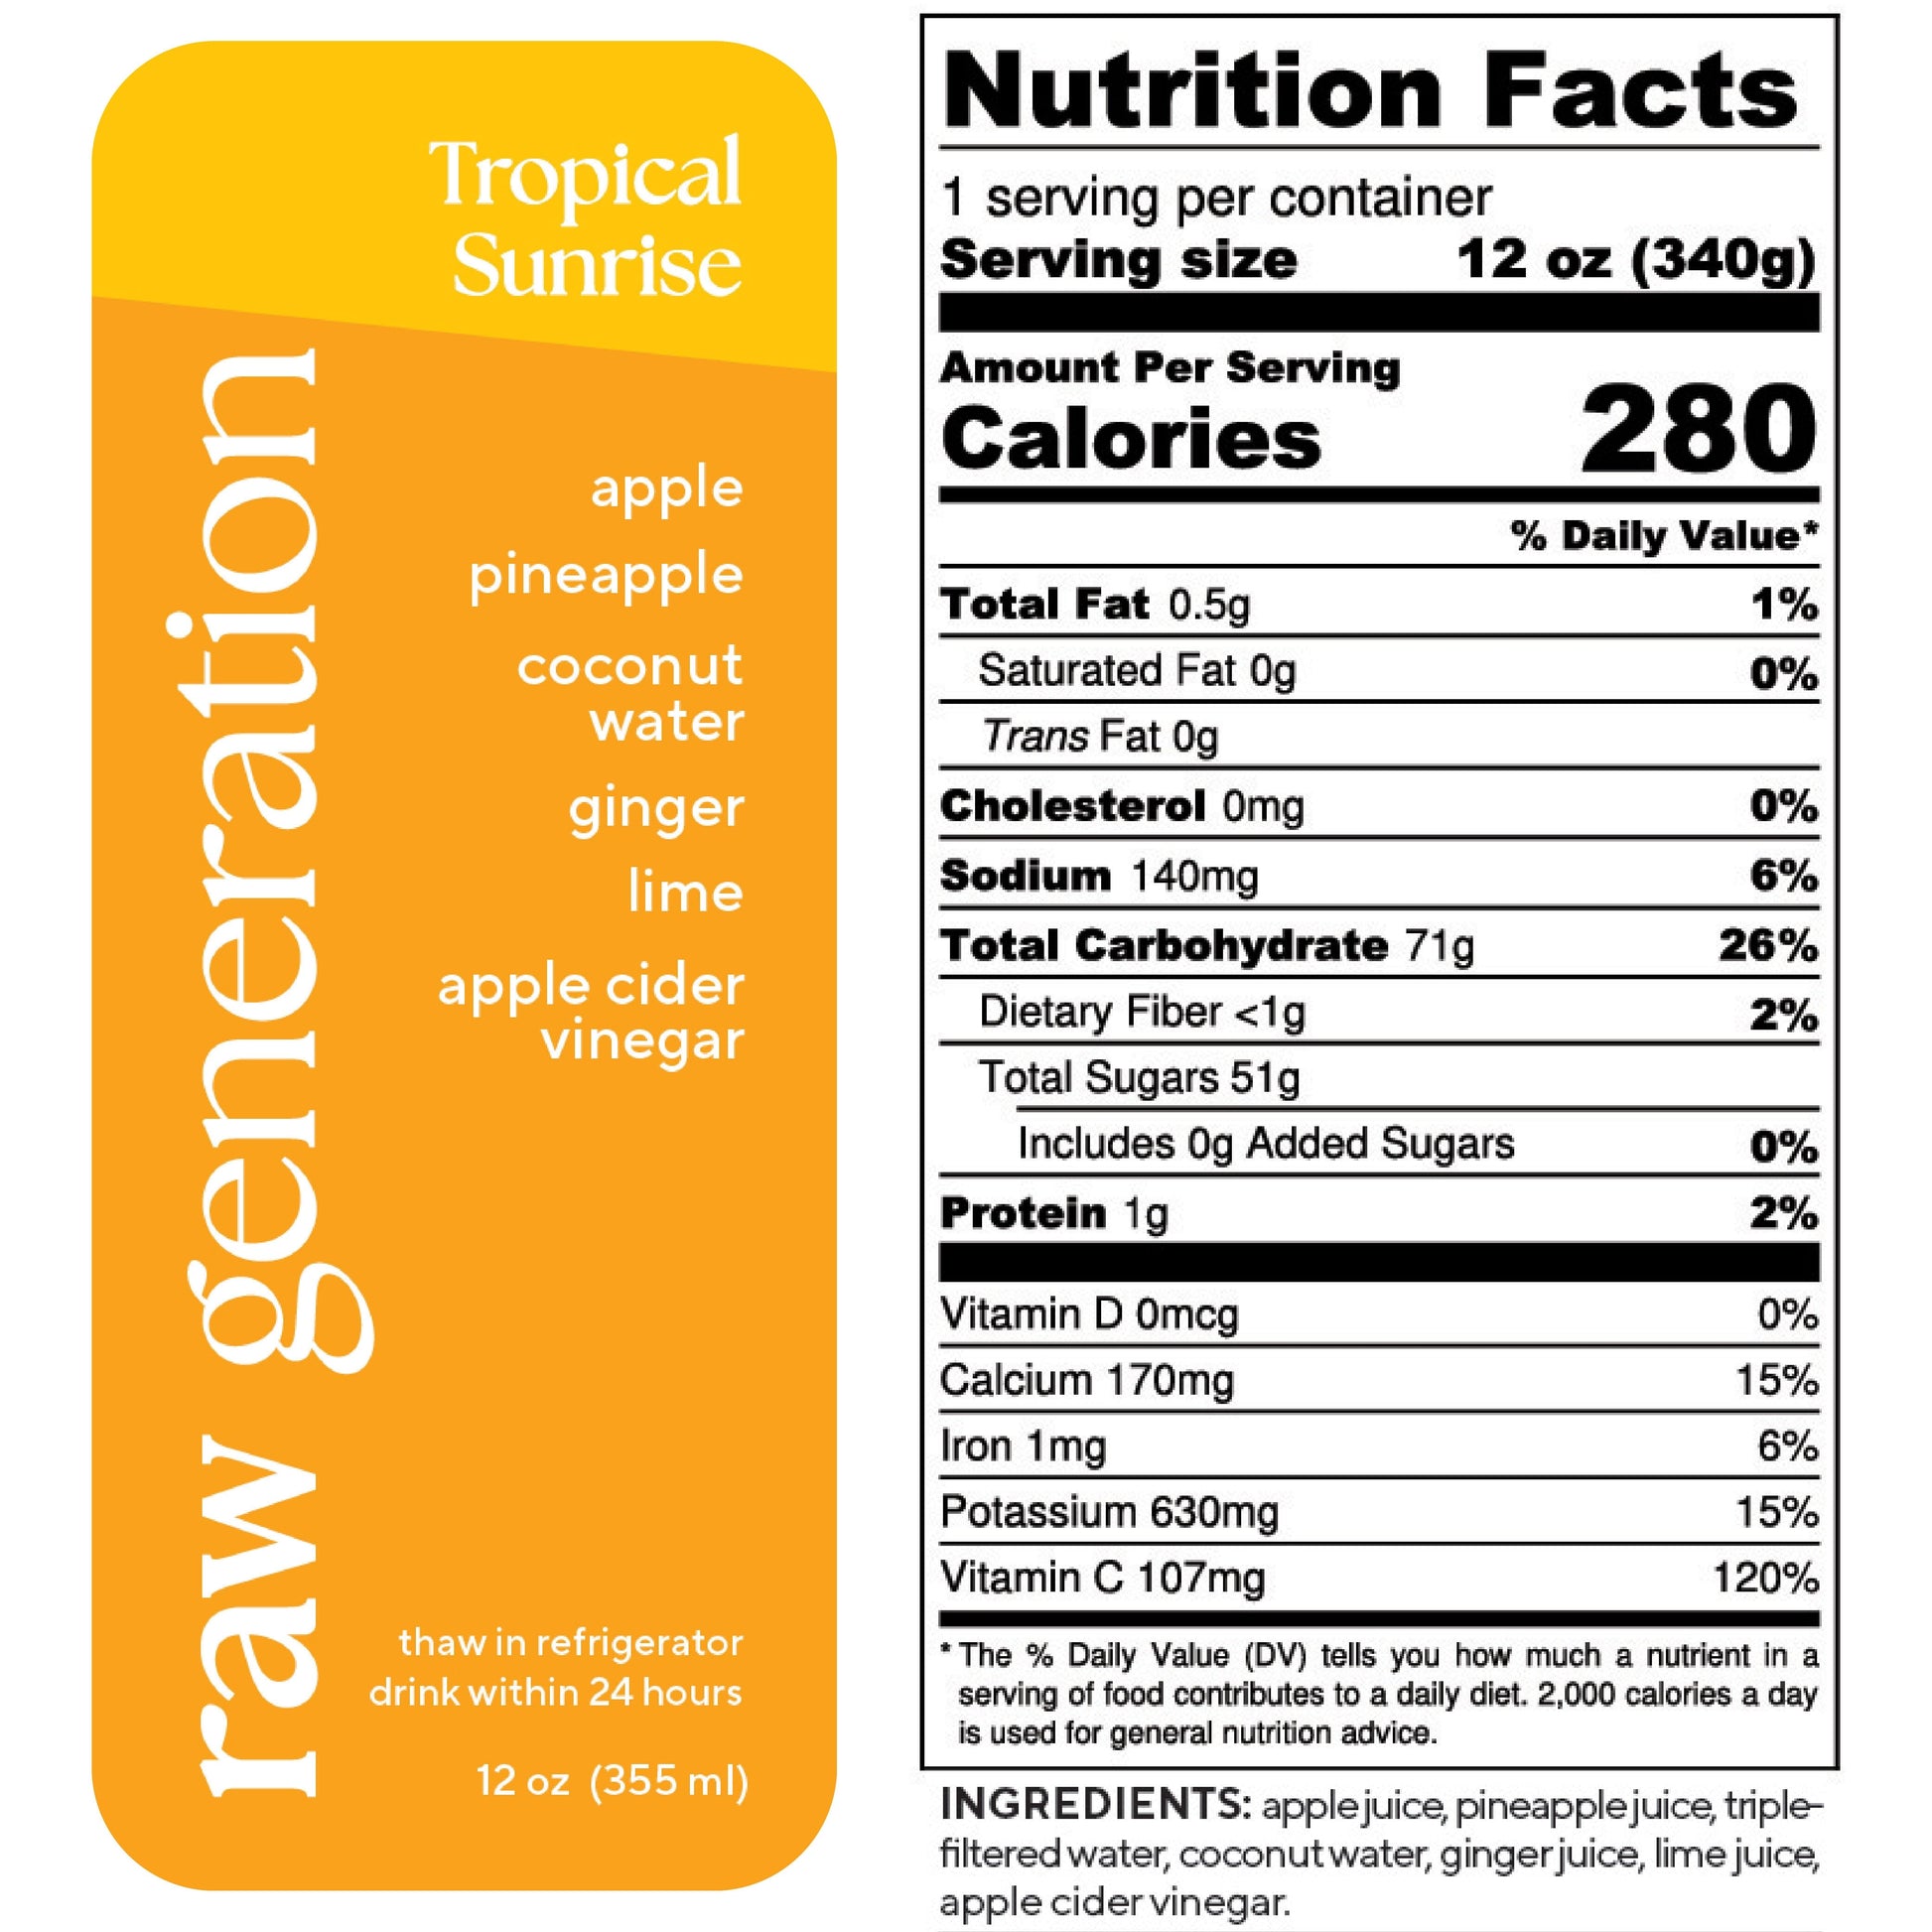 Nutrition Facts, 1 serving/container, Serving size 12 oz (340g), Calories 280, Total Fat 0.5g, Saturated Fat 0g, Trans Fat 0g, Cholesterol 0mg, Sodium 140mg, Total Carbohydrate 71g, Dietary Fiber 0g, Total Sugars 51g, Added Sugars 0g, Protein 1g, Vitamin D 0mcg, Calcium 170mg, Iron 1mg, Potassium 630mg, Vitamin C 107mg; Ingredients used: apple juice, pineapple juice, triple-filtered water, coconut water, ginger juice, lime juice, apple cider vinegar.